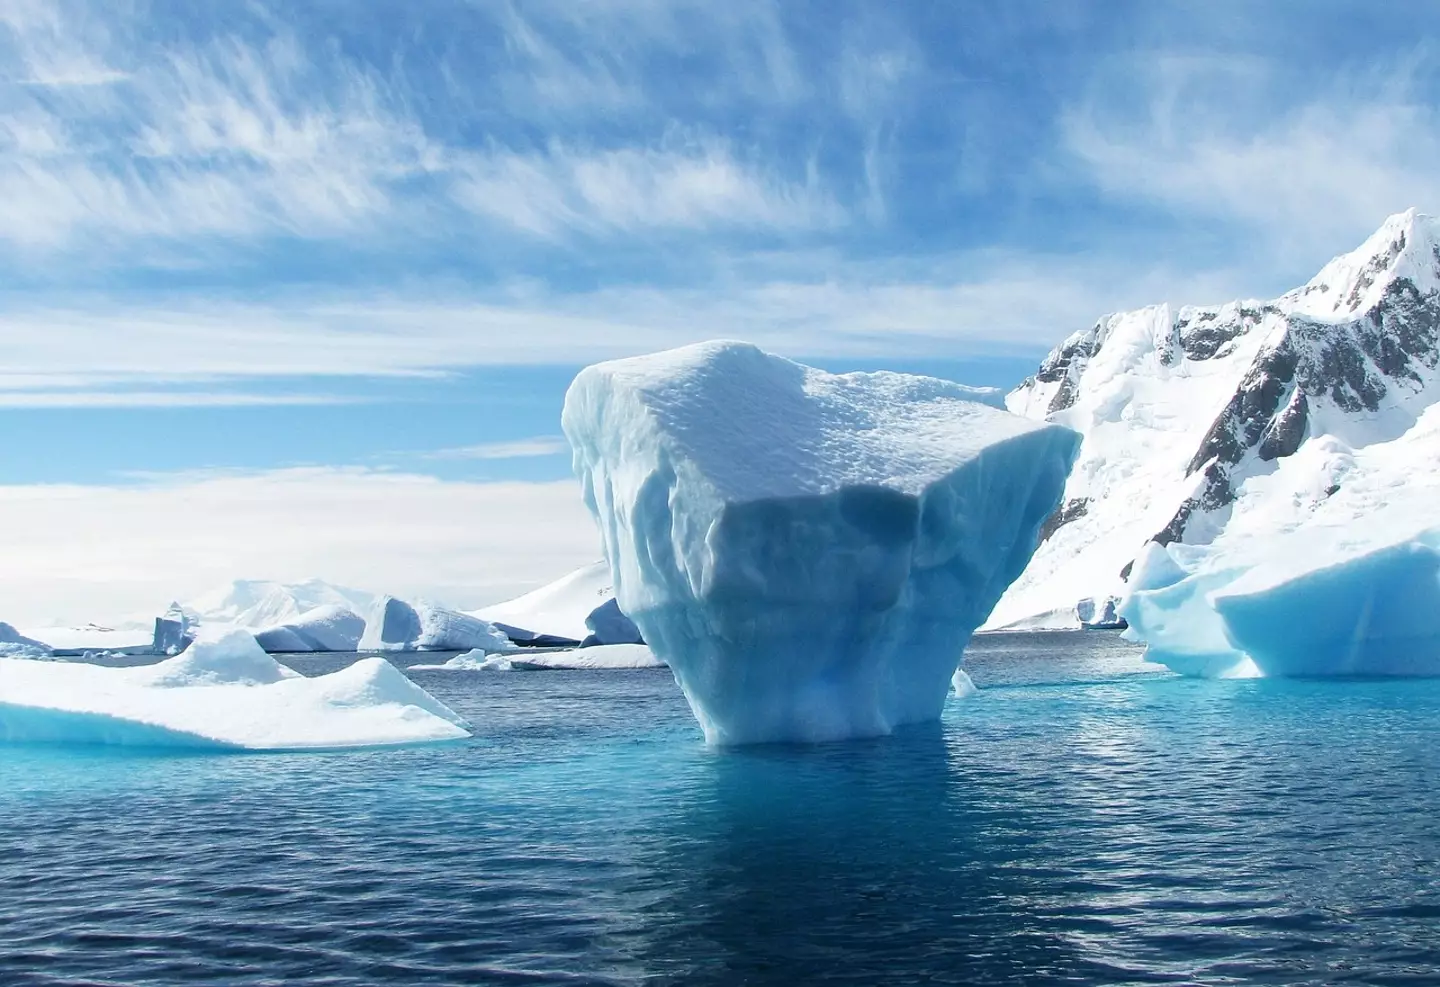 Antarctica has its own accent, scientists have discovered.